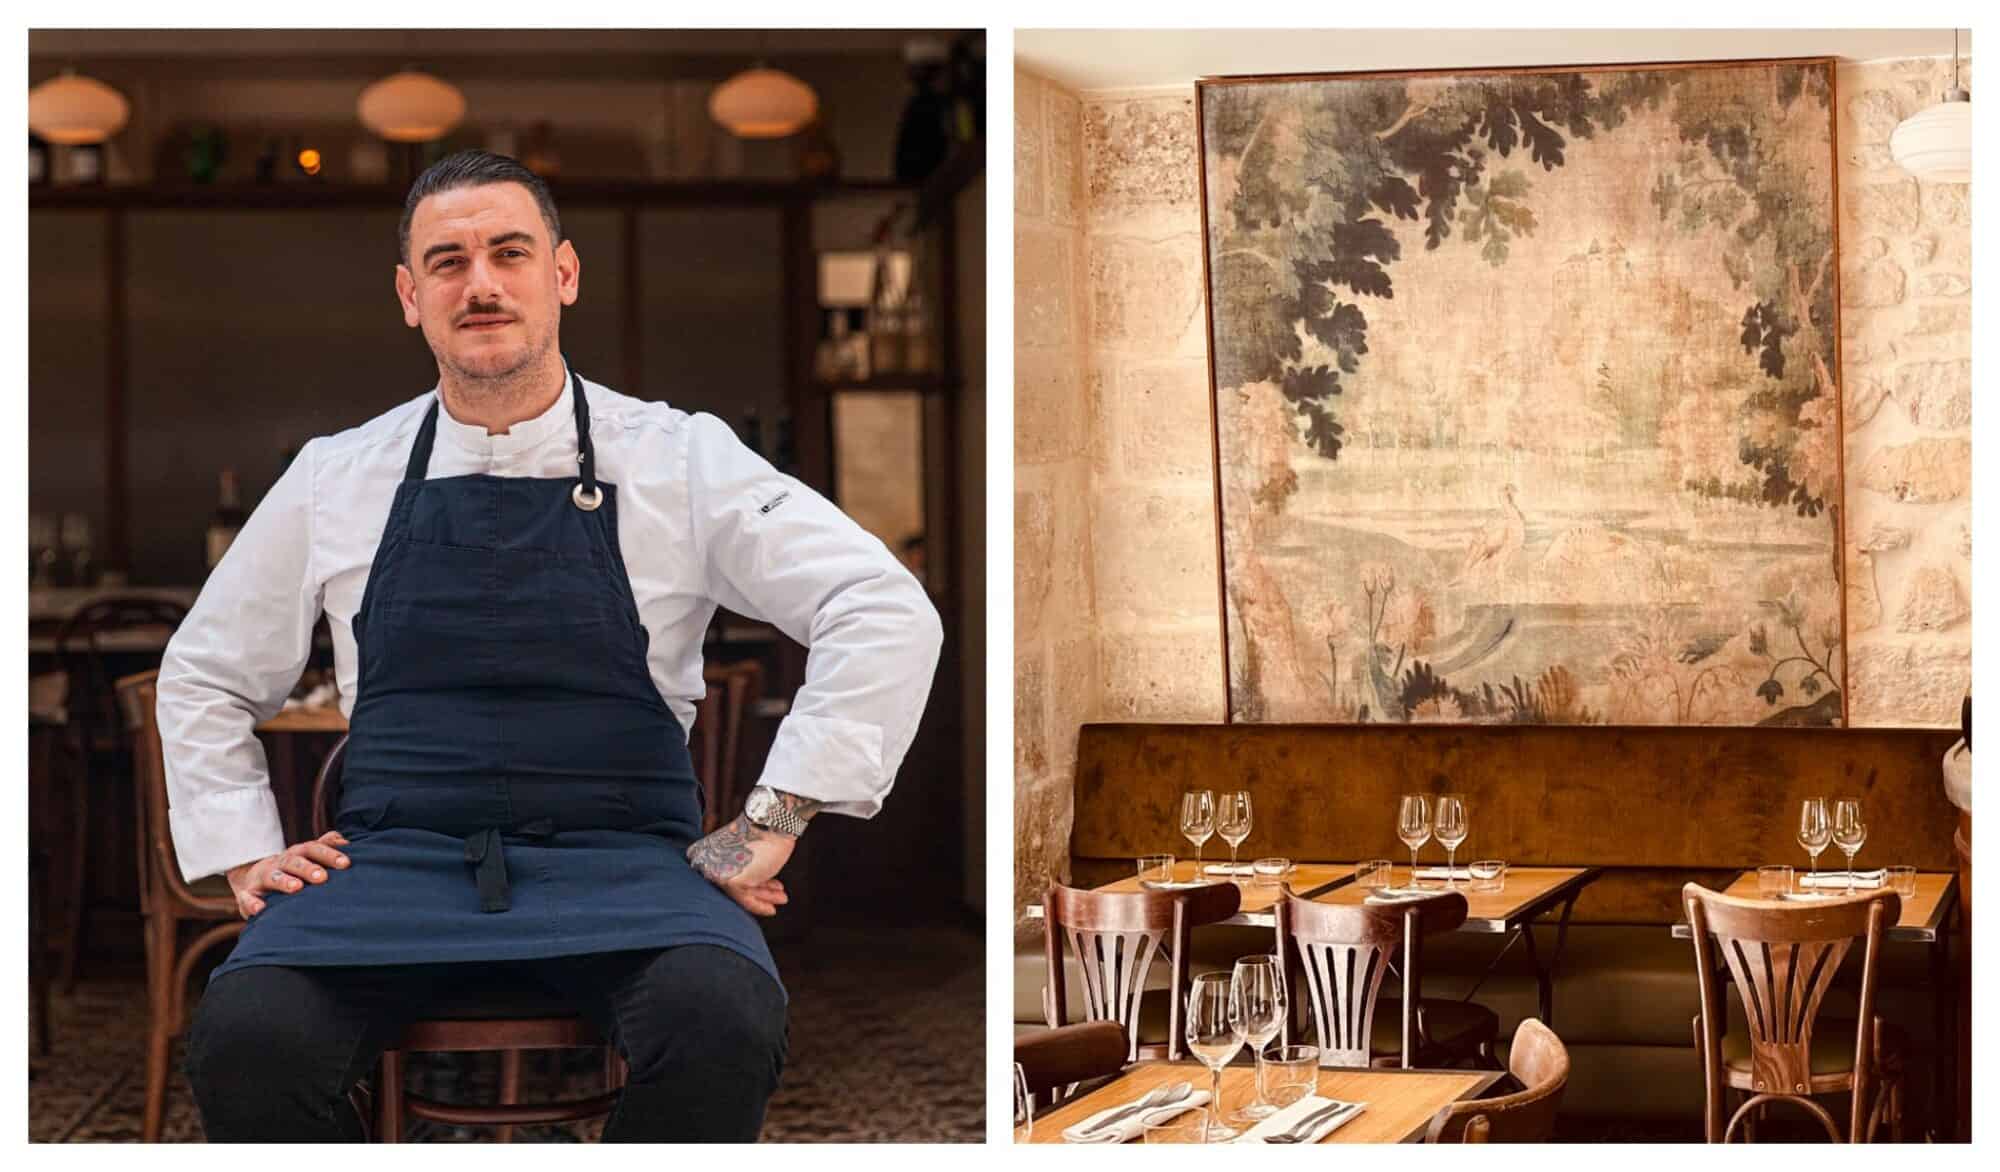 Left: Chef Arnaud Baptiste dressed in his chefs whites with a blue apron on, sat in front of Colvert restaurant; right: the beautiful interior of Colvert restaurant with it's aged stone walls and antique tapestry behind a row of wooden tables and benches.